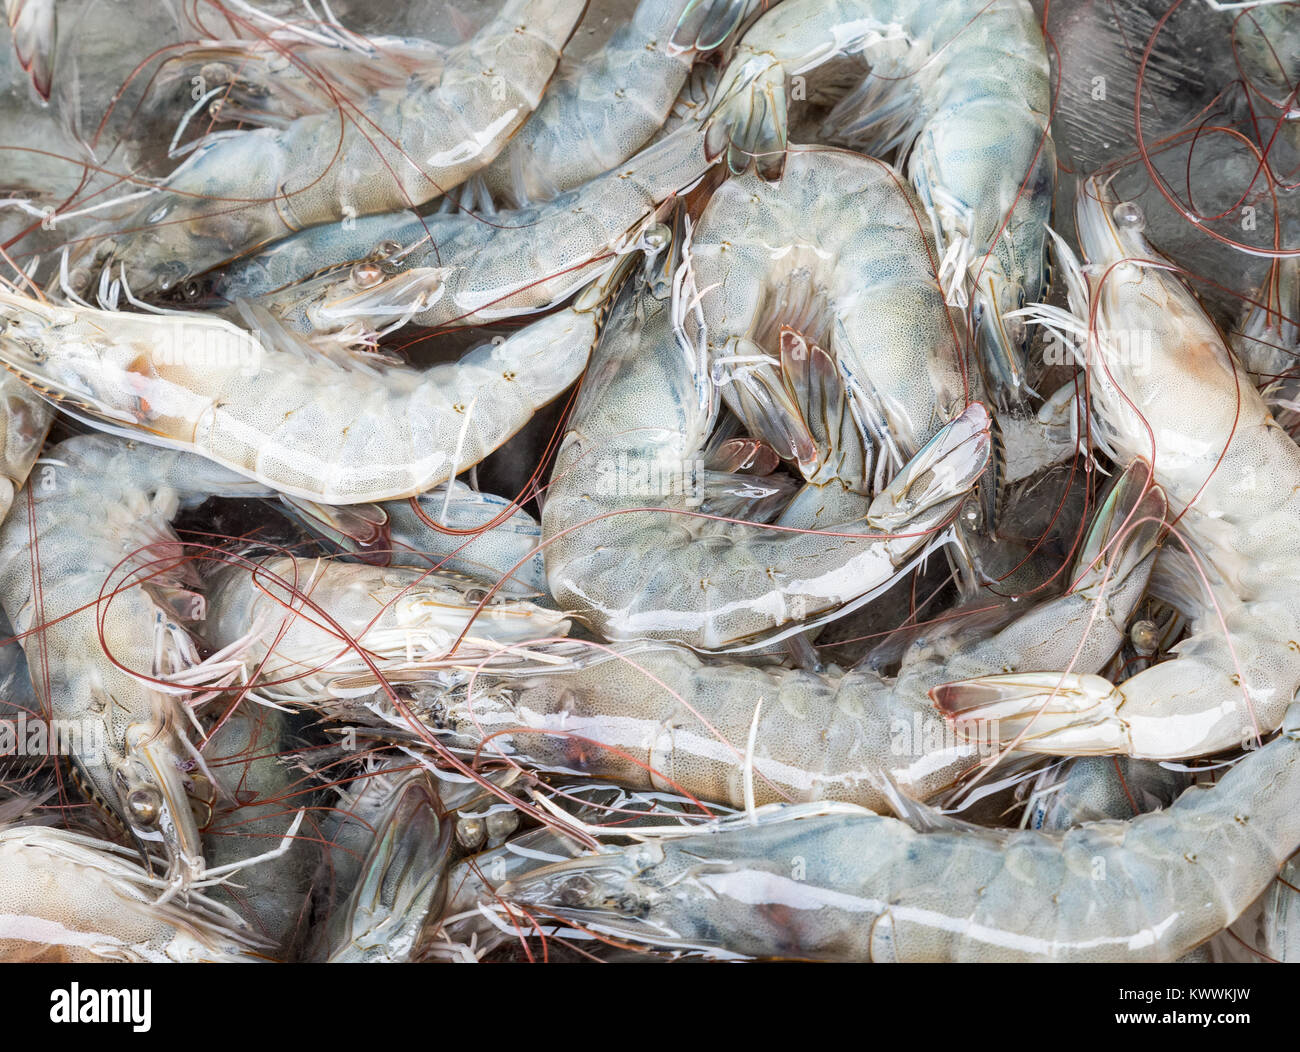 Fresh shrimp pile with the ice cube on the tray for sell in the local market,Thailand. Stock Photo